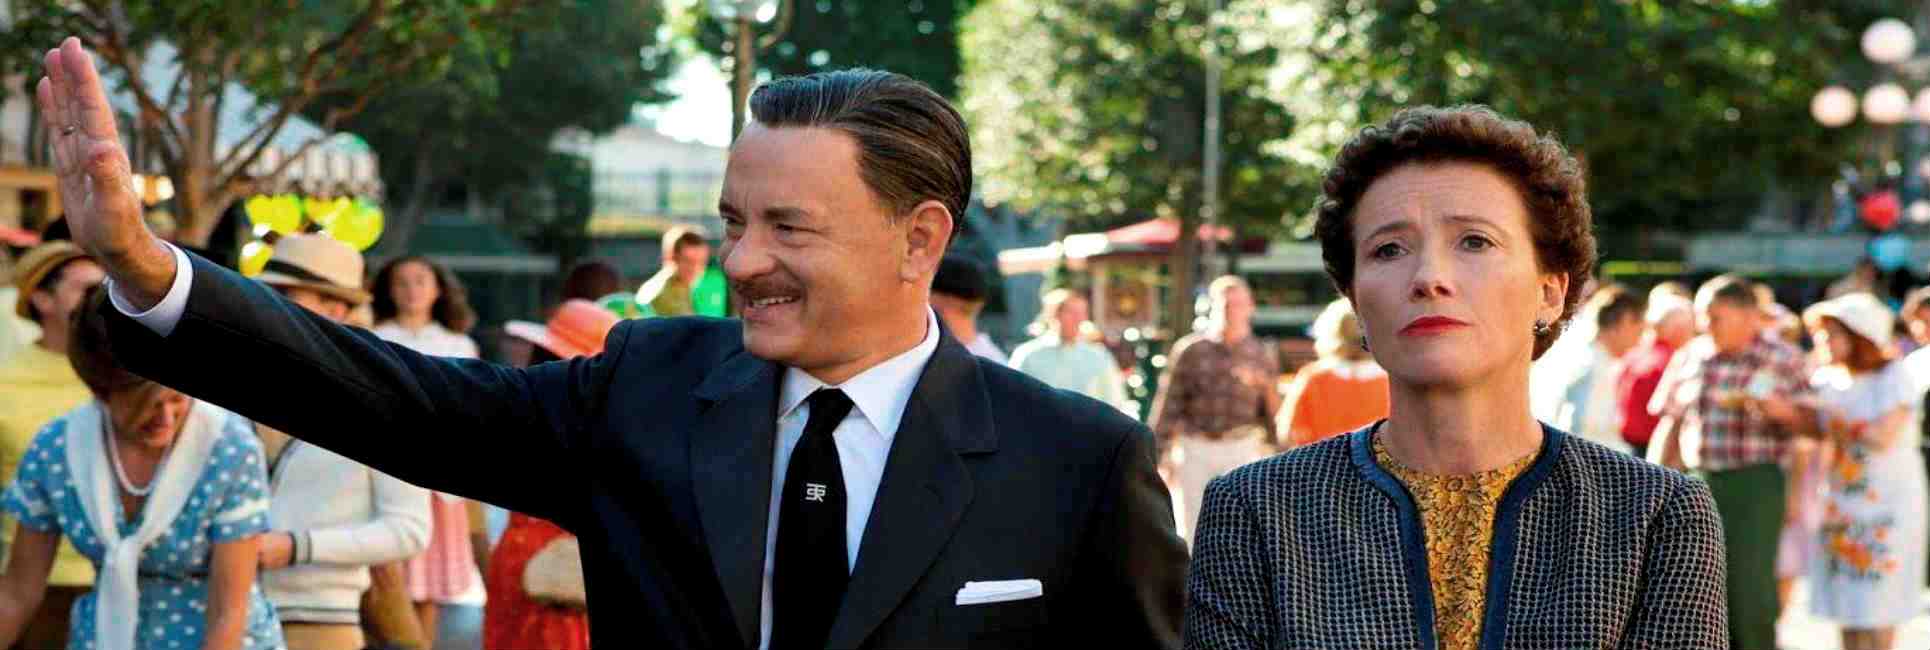 Archived: Review: Saving Mr. Banks (2013) - archived